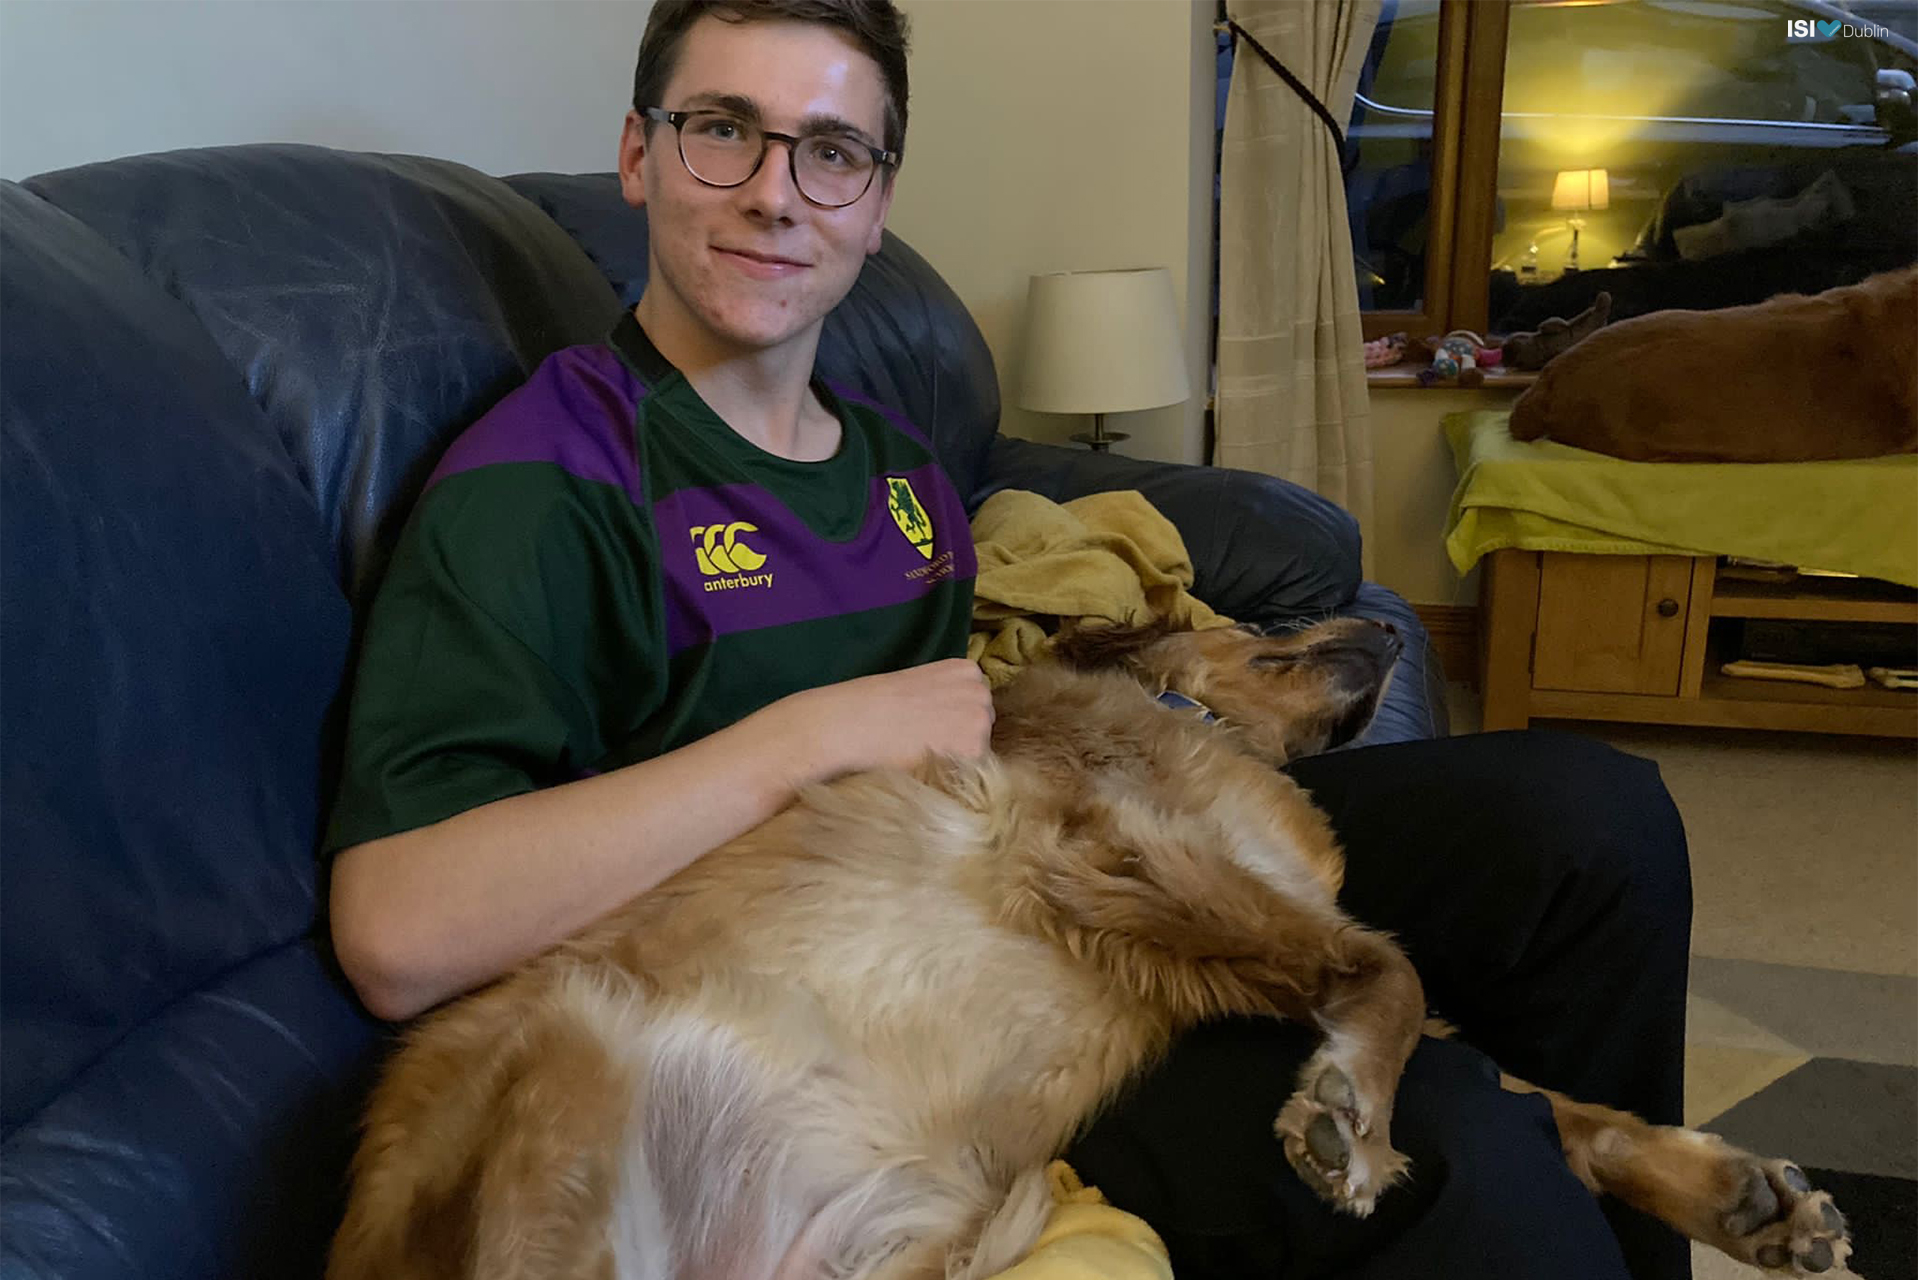 Leo Folgmann (5th year at Sandford Park)at home with the dog!